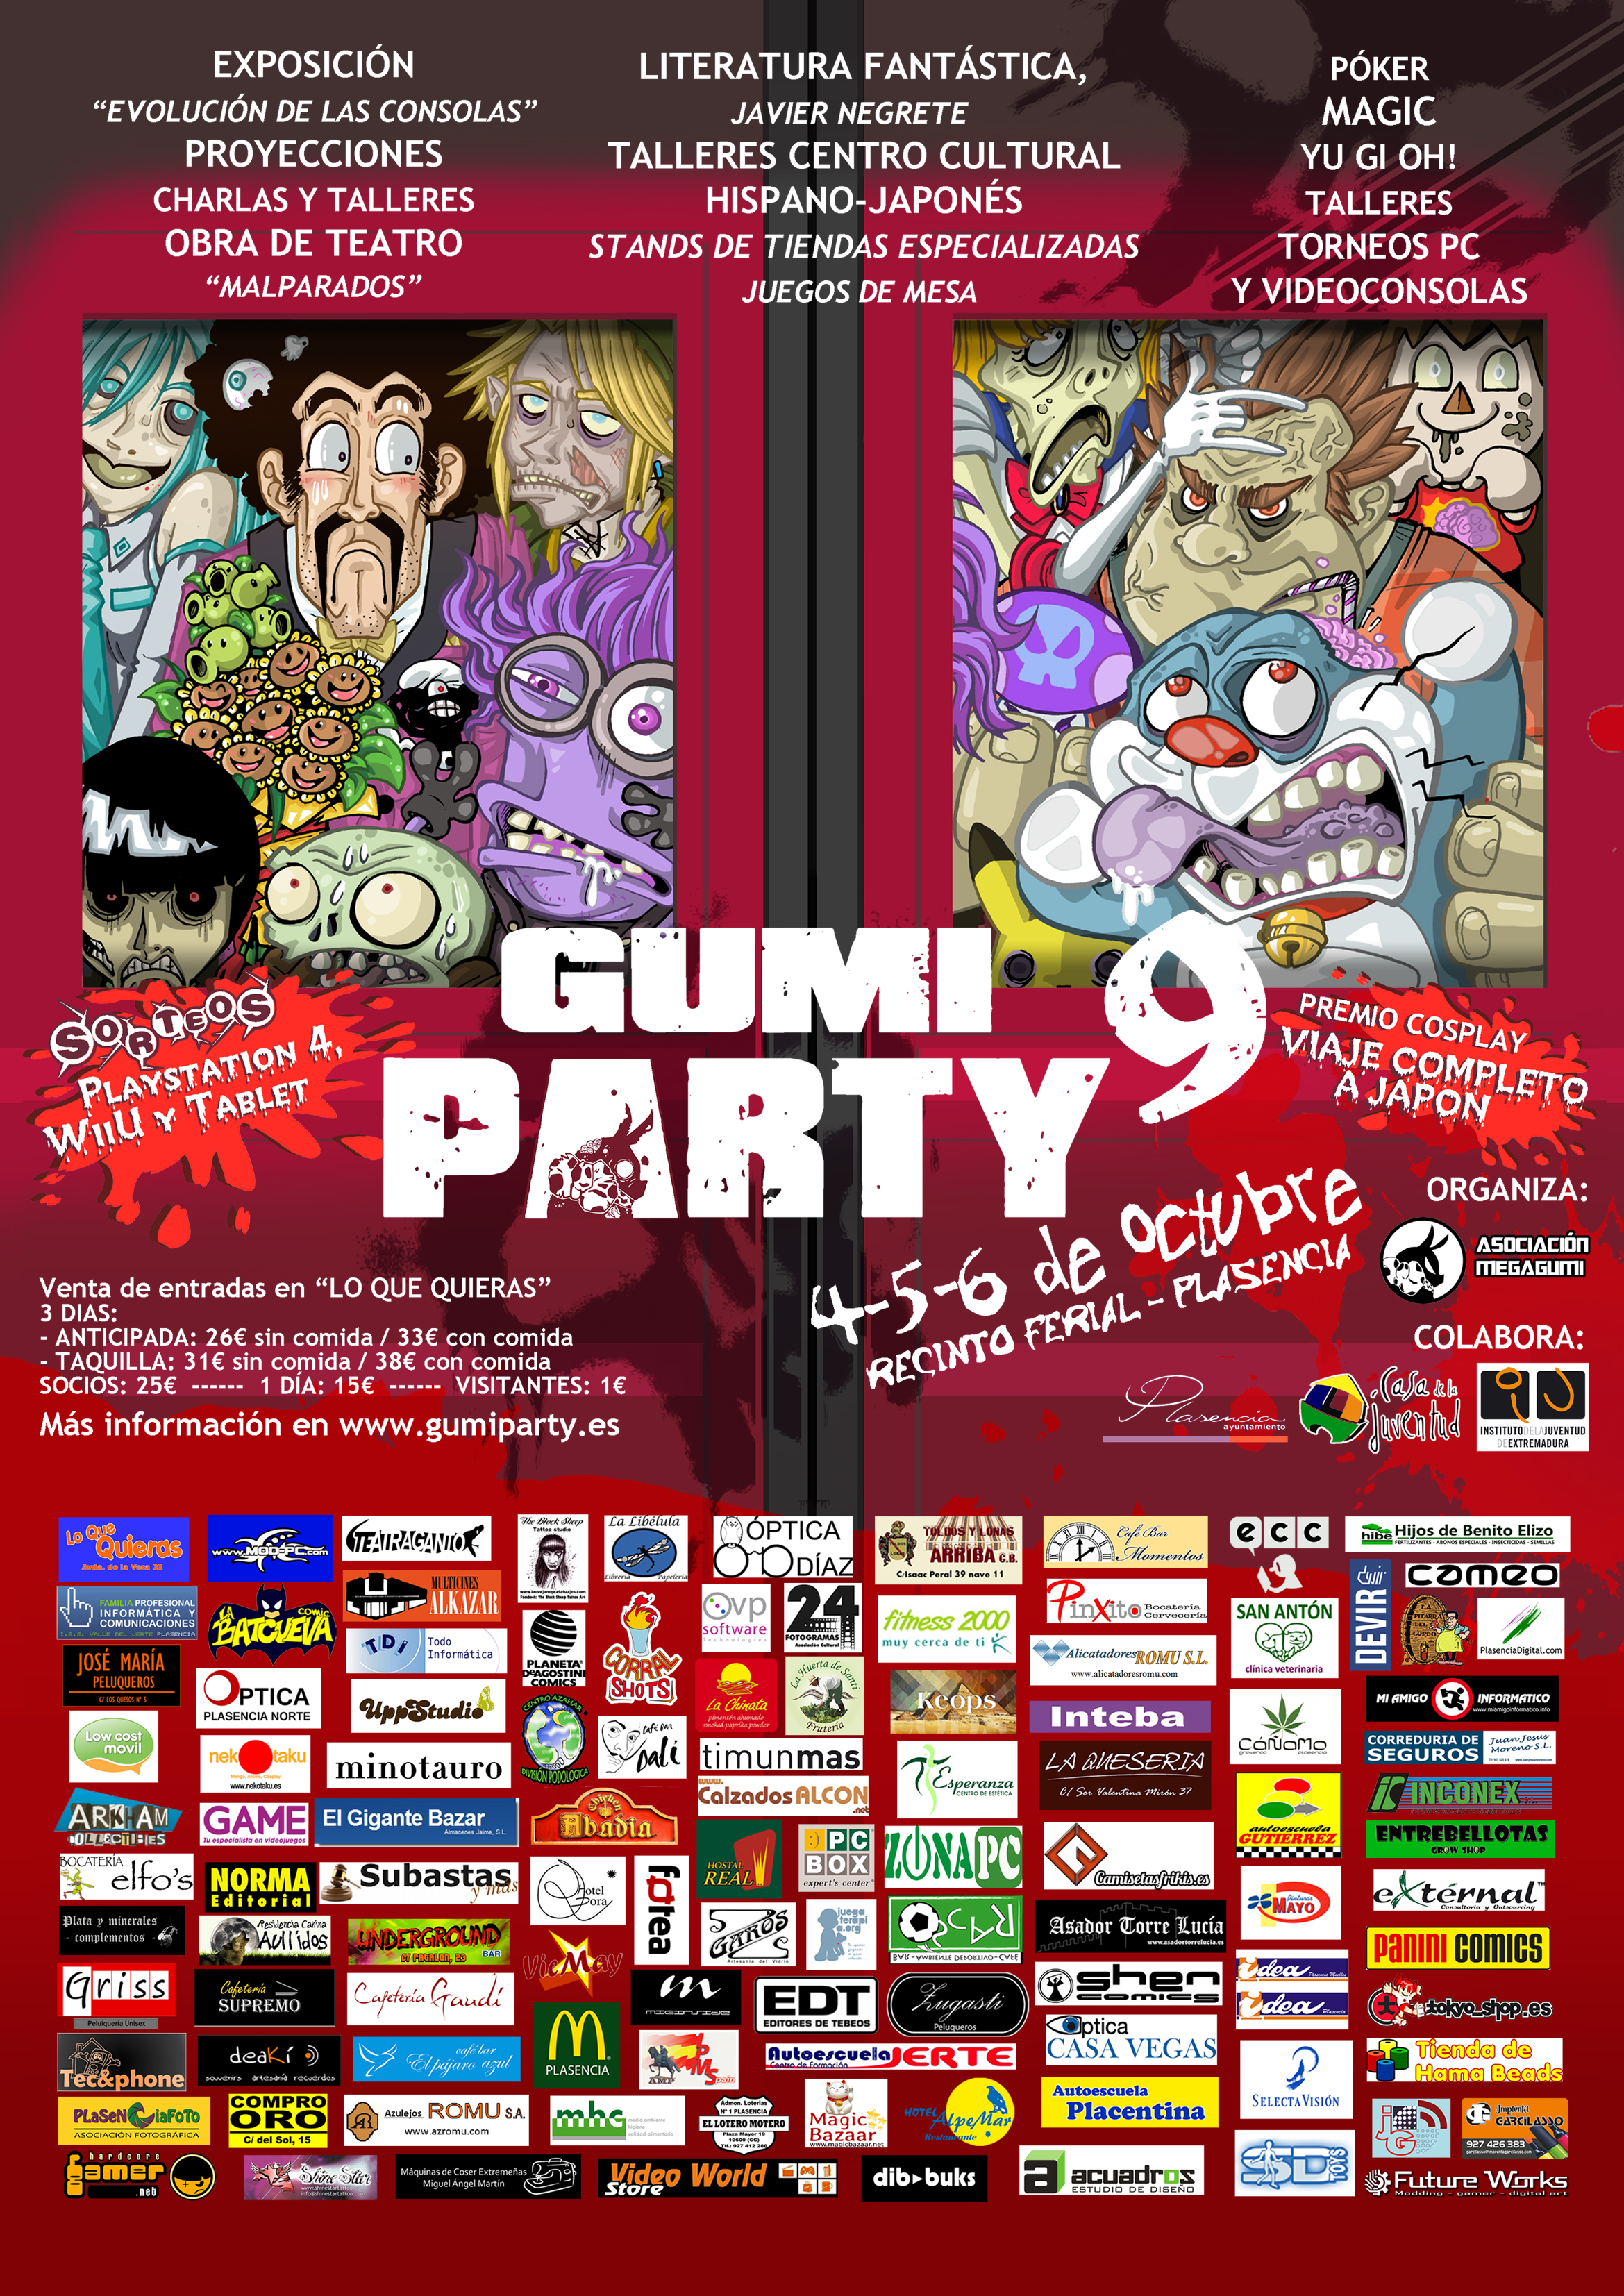 Gumiparty 9